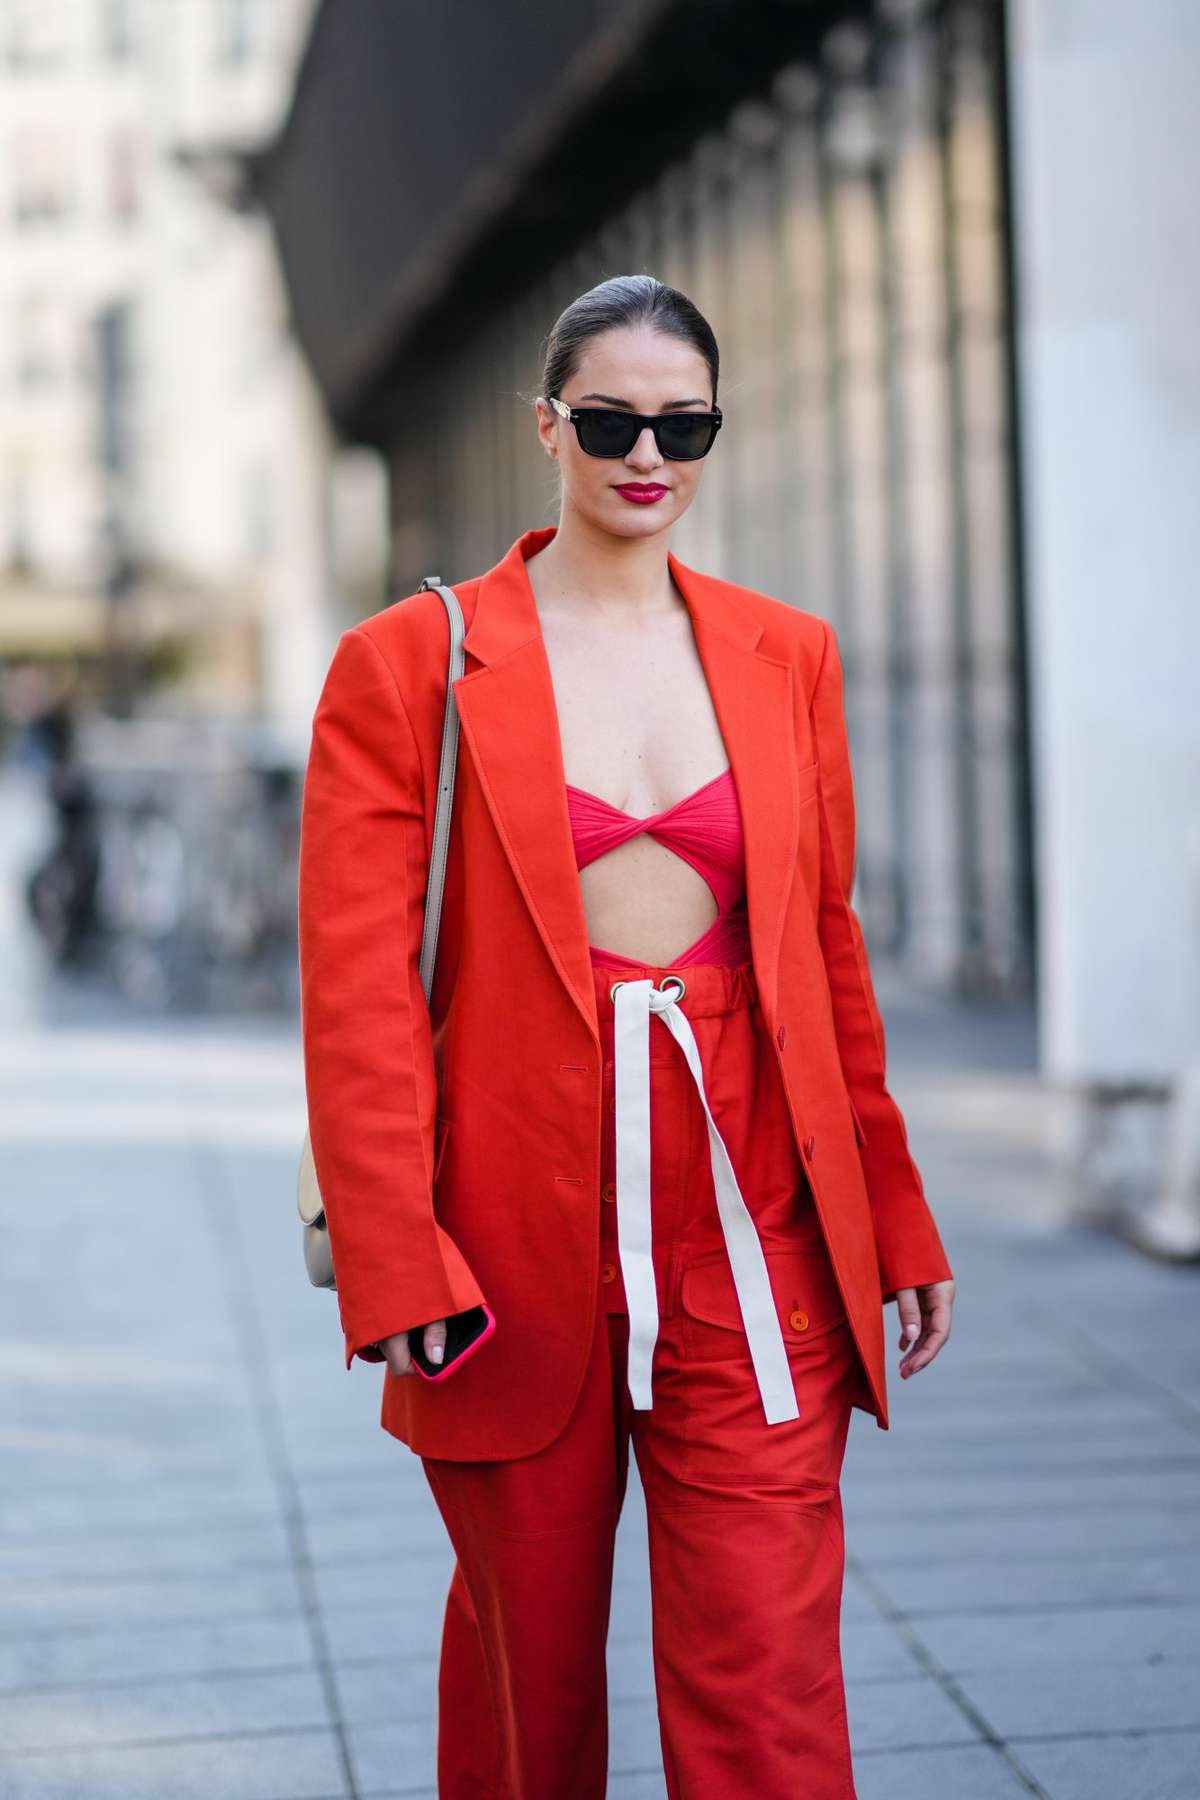 Wear These 7 Color If You're Hoping to Manifest Good Vibes This Spring